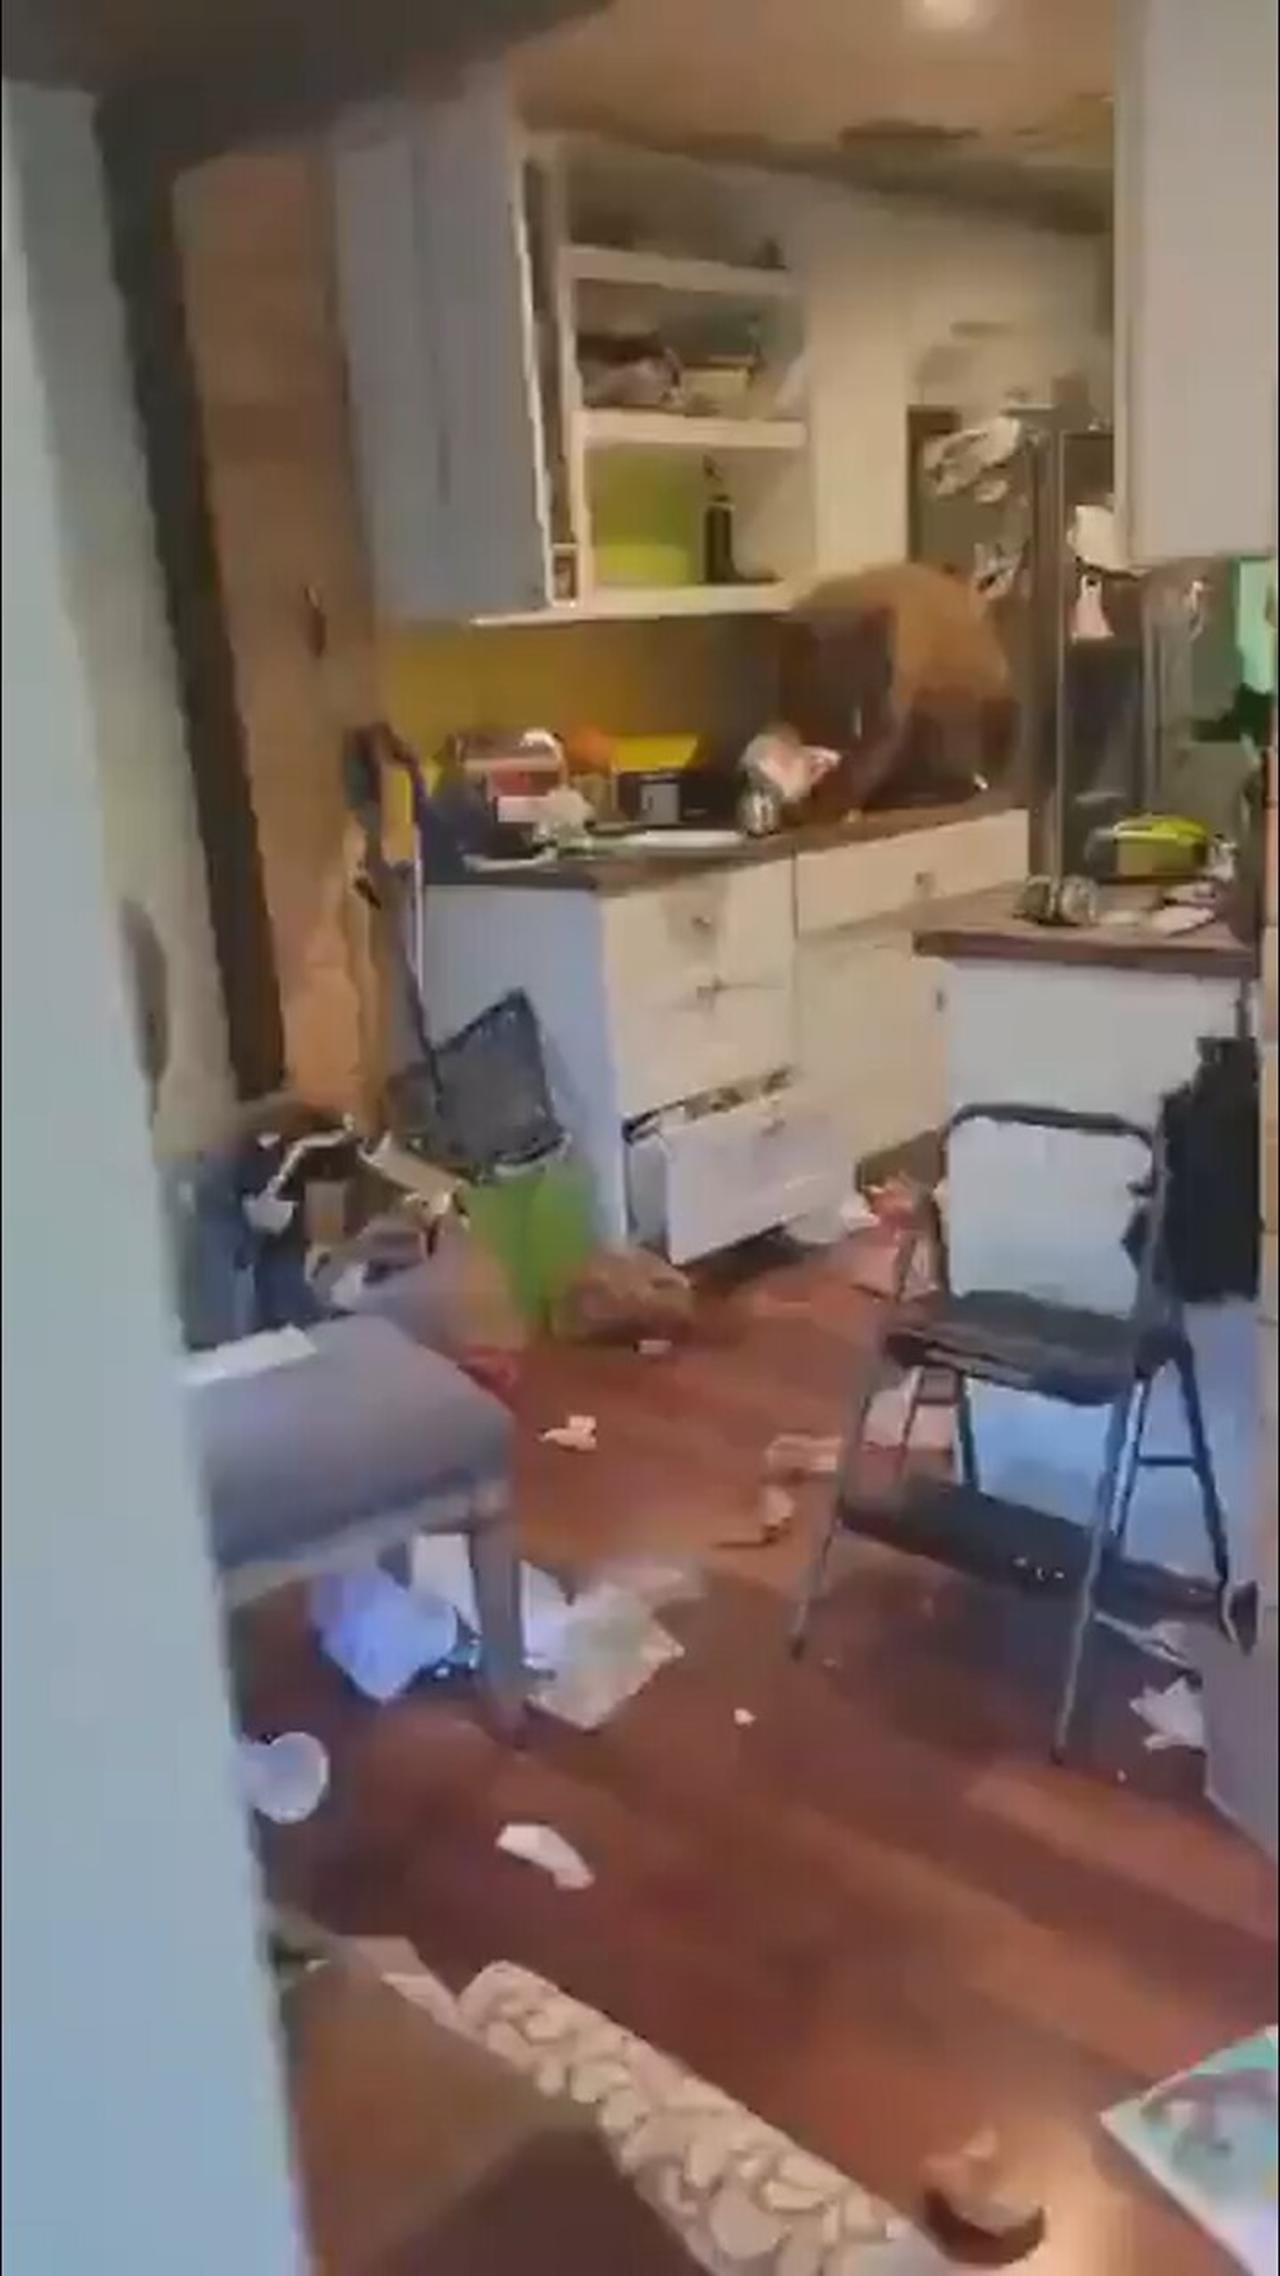 Man arrives home to find a bear 🐻 eating his bucket of KFC.